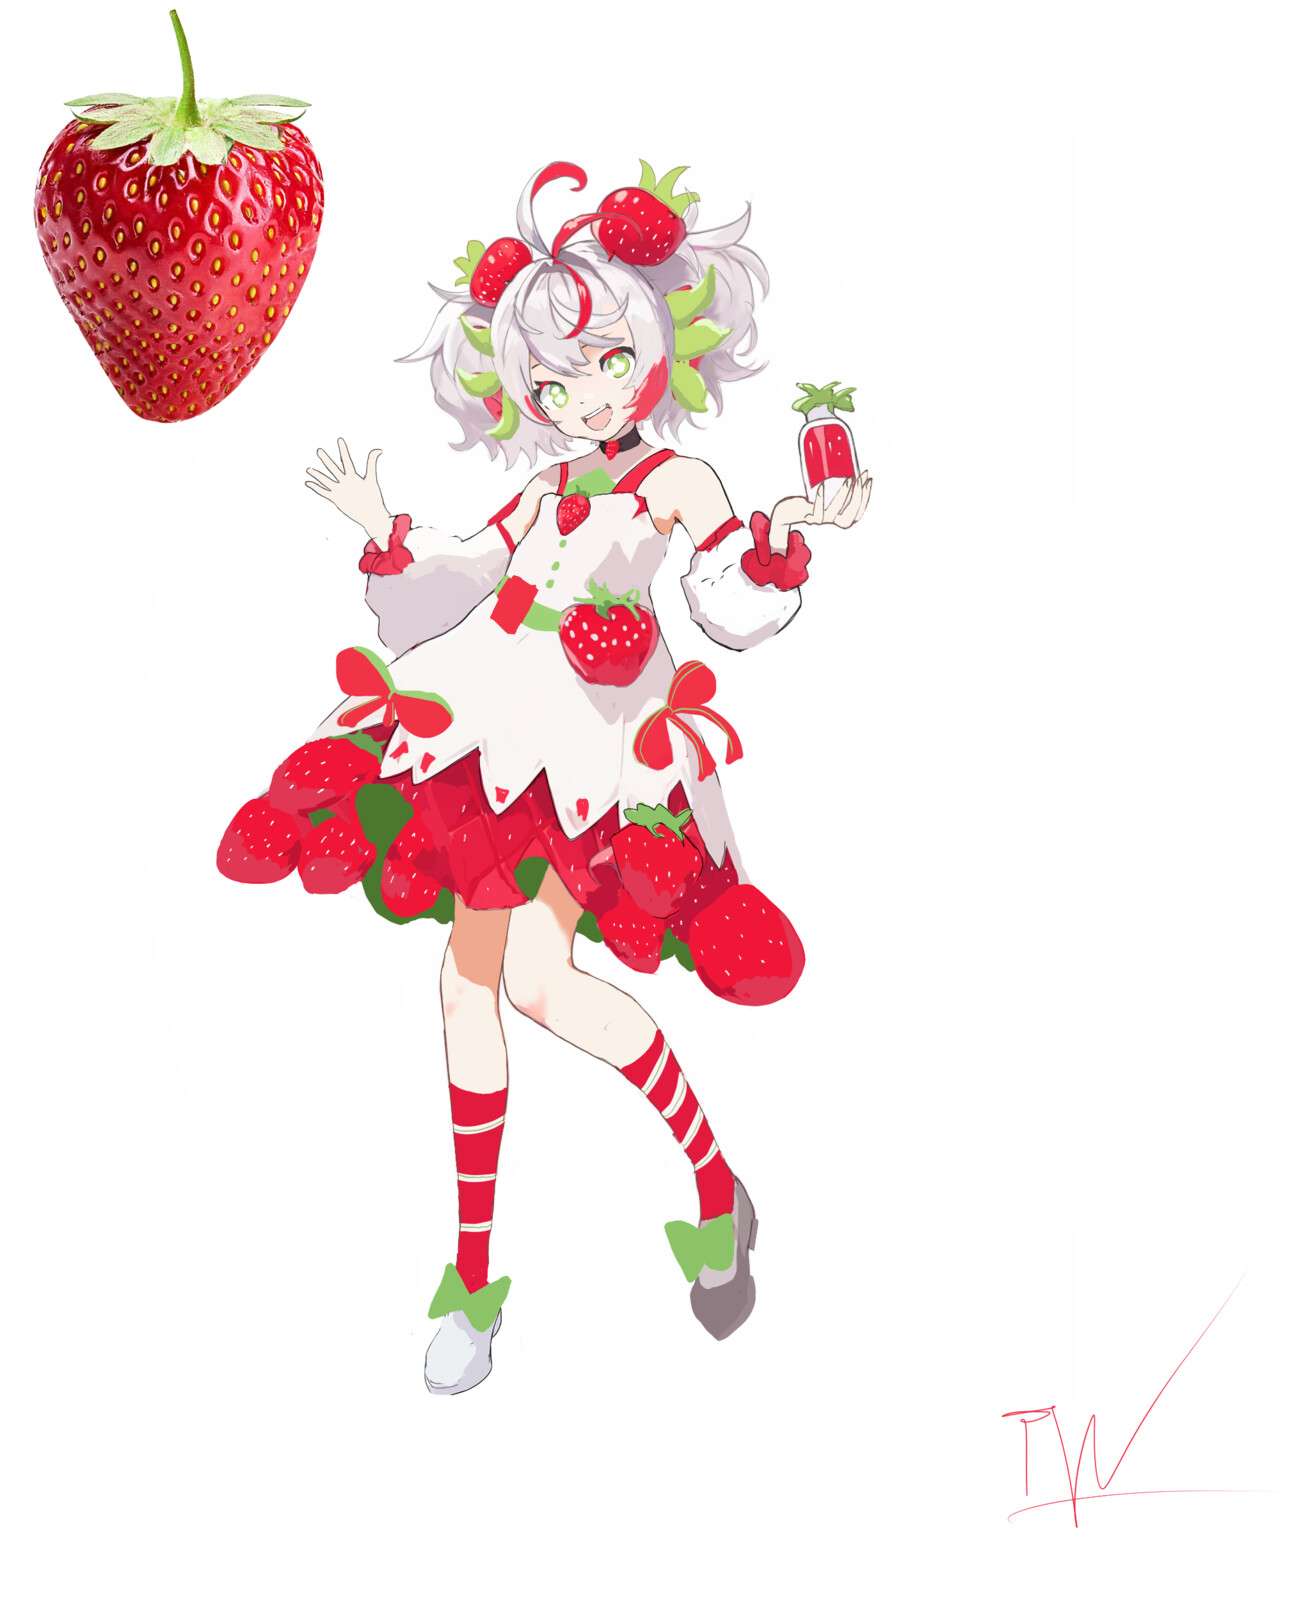 Cooking Jam Strawberry concept